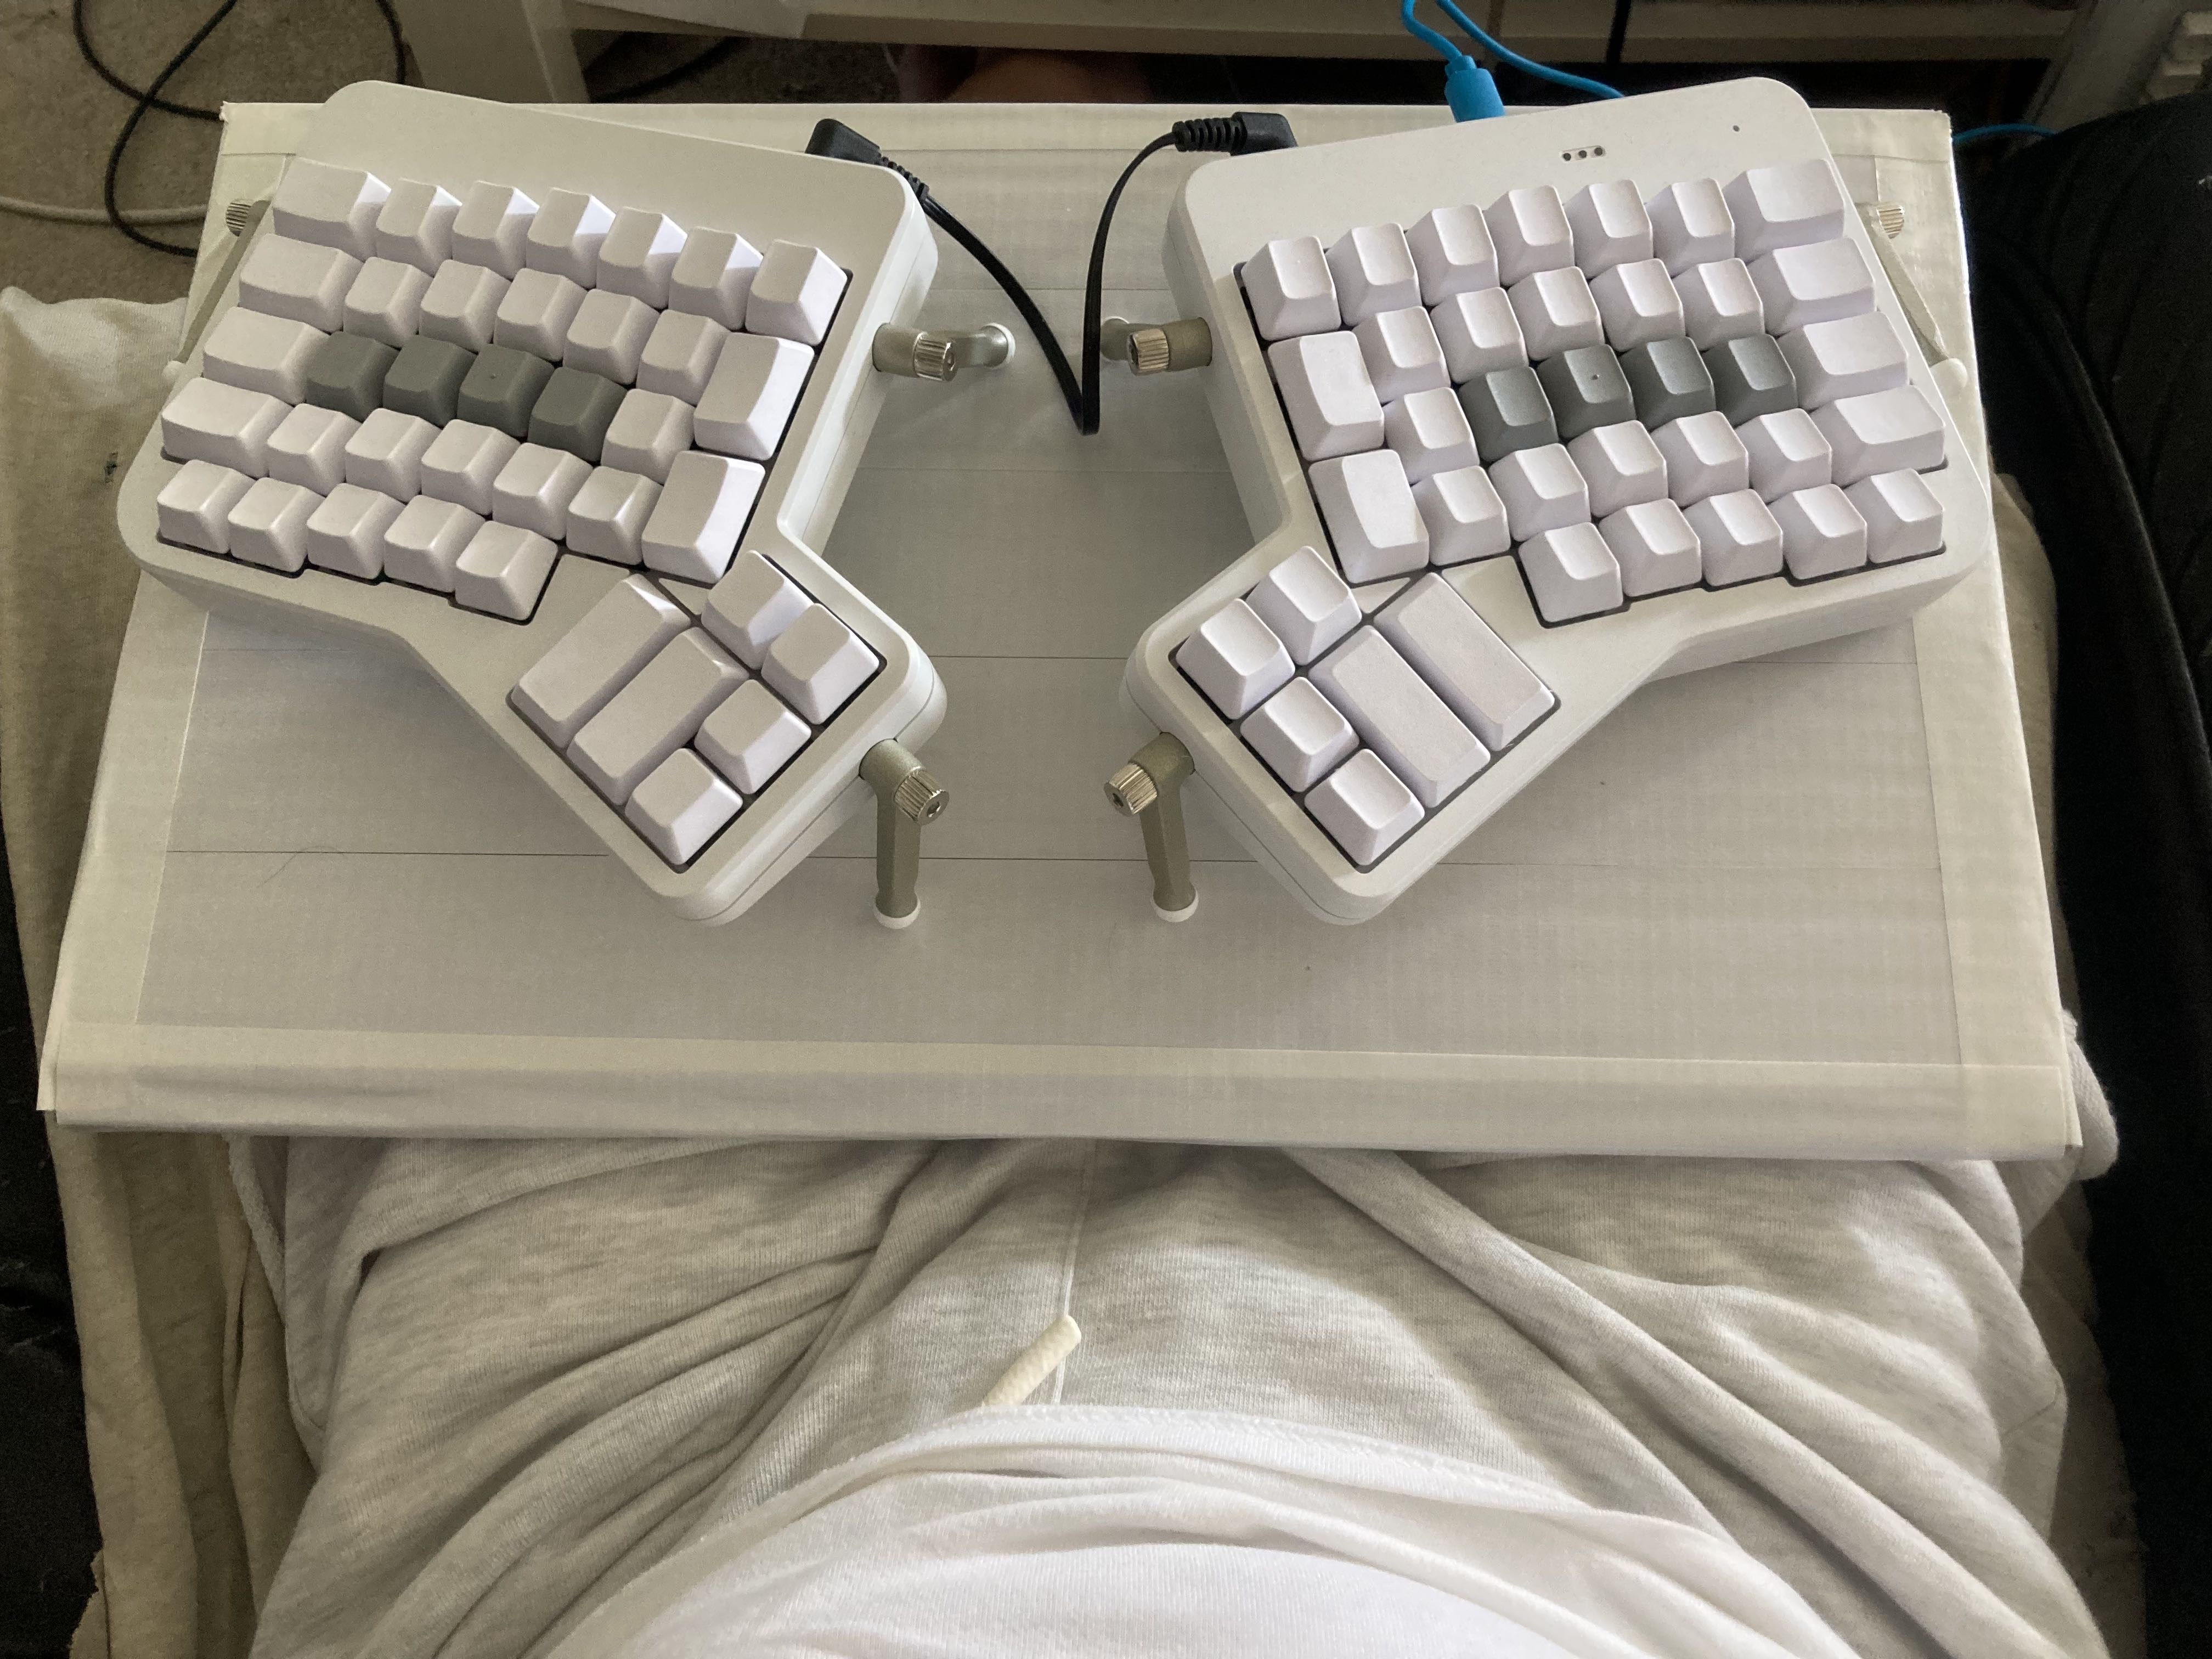 Photo of the keyboard tray in use, sitting on my lap, with the ErgoDox keyboard on top of it.